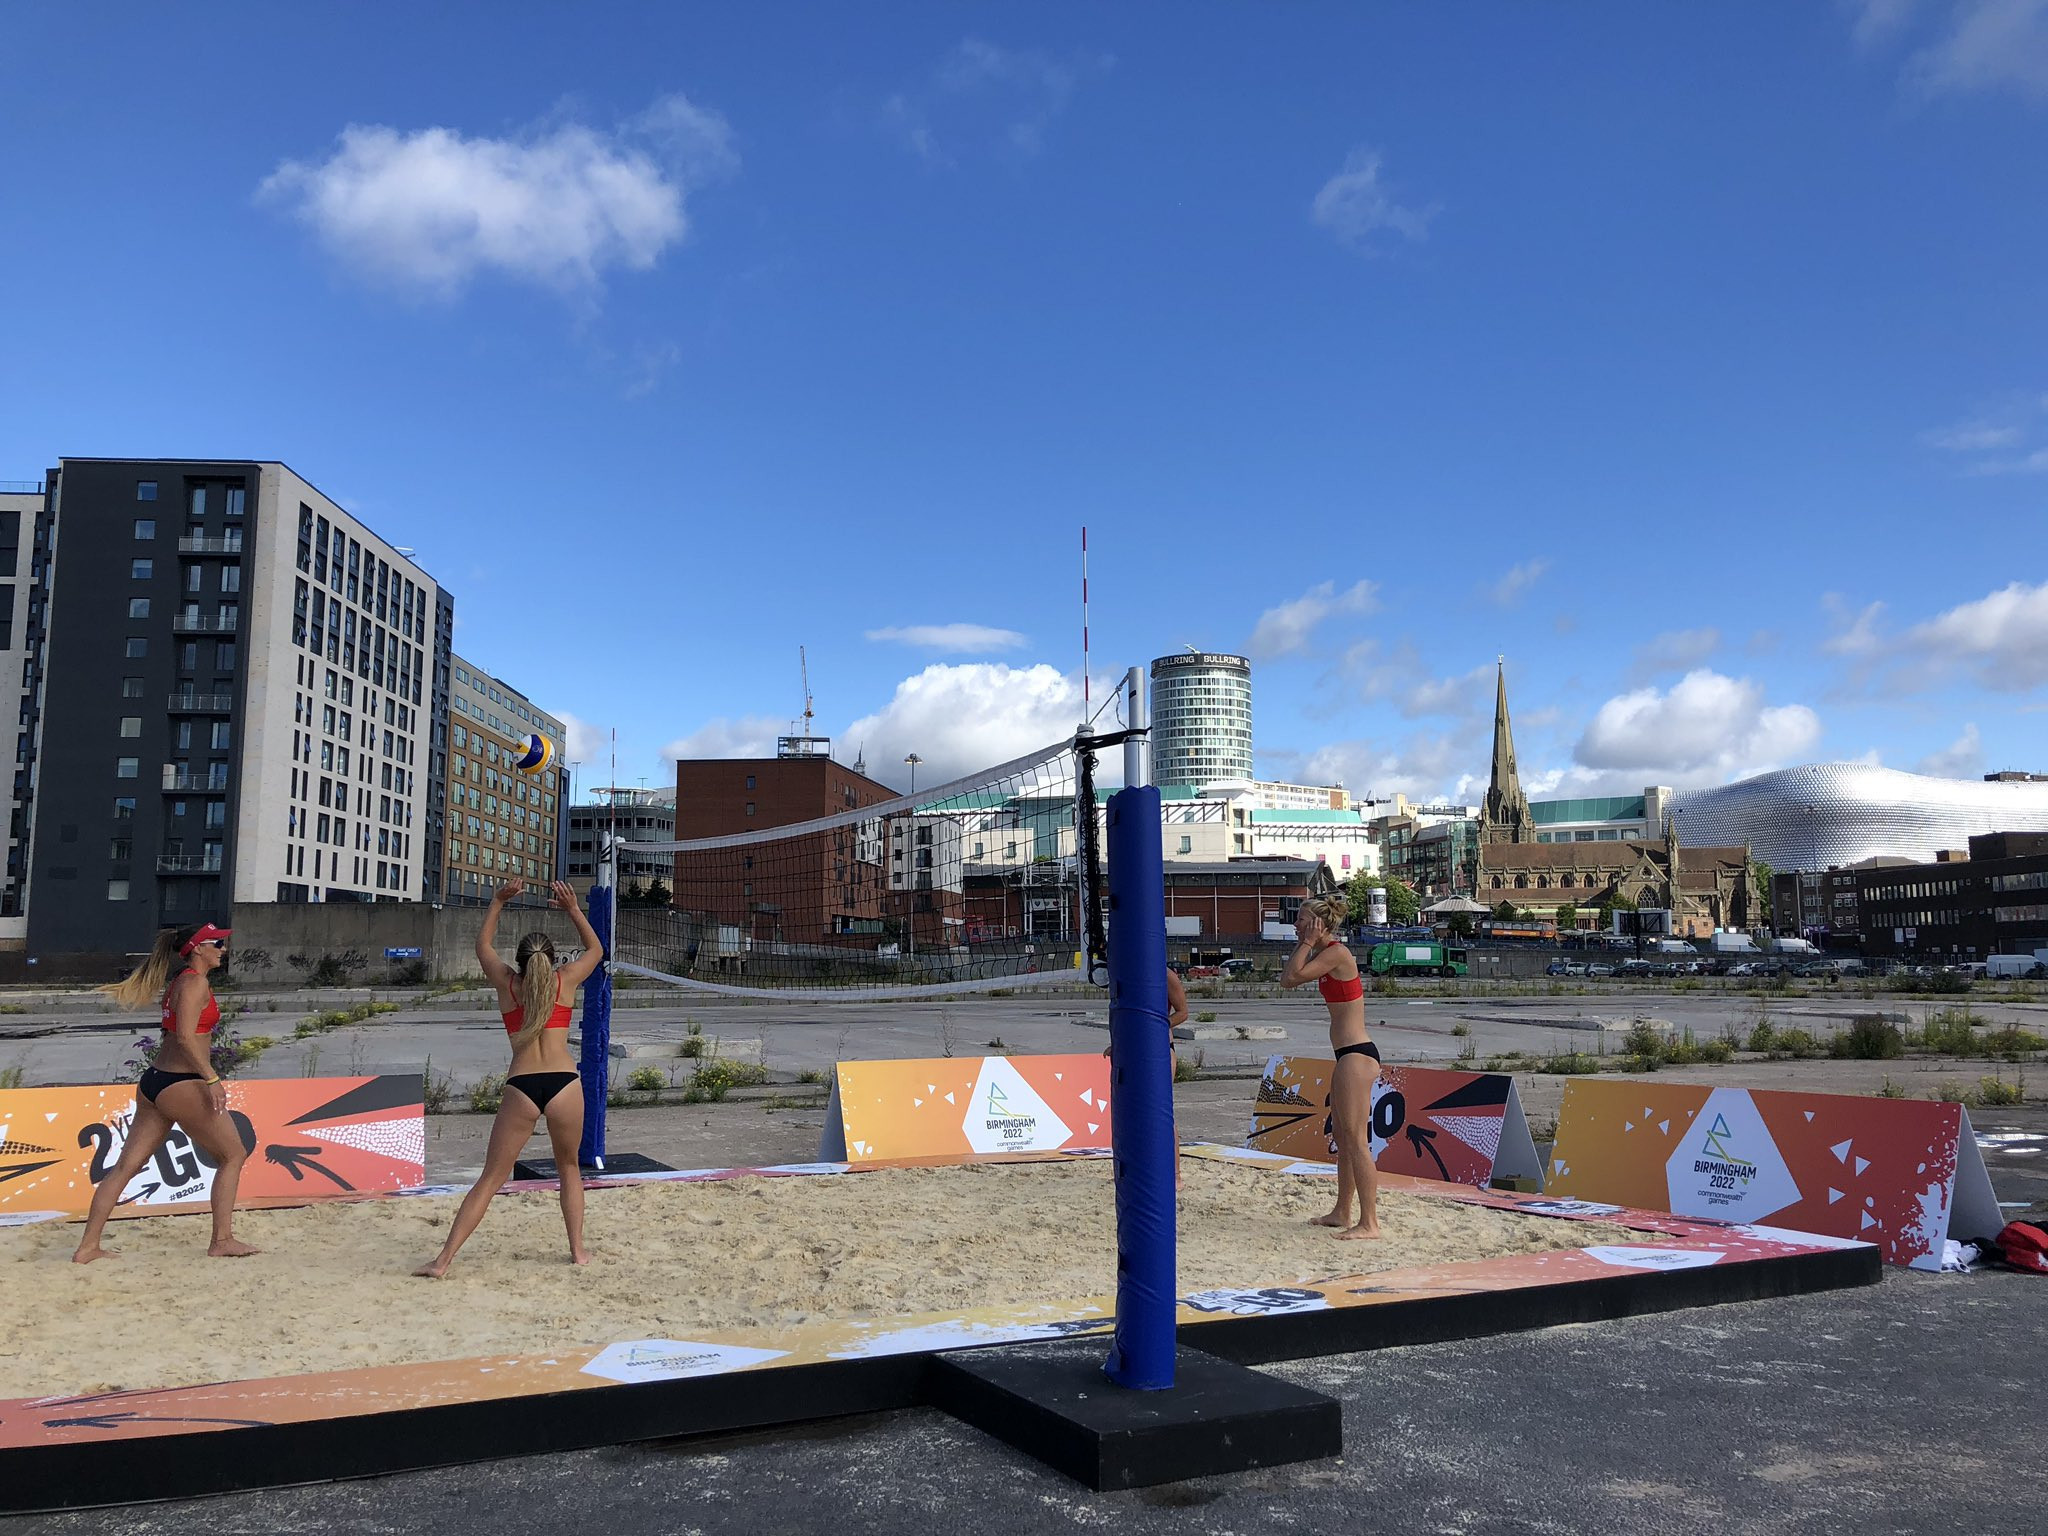 Beach volleyball is to make its second Commonwealth Games appearance at Birmingham 2022 ©ITG